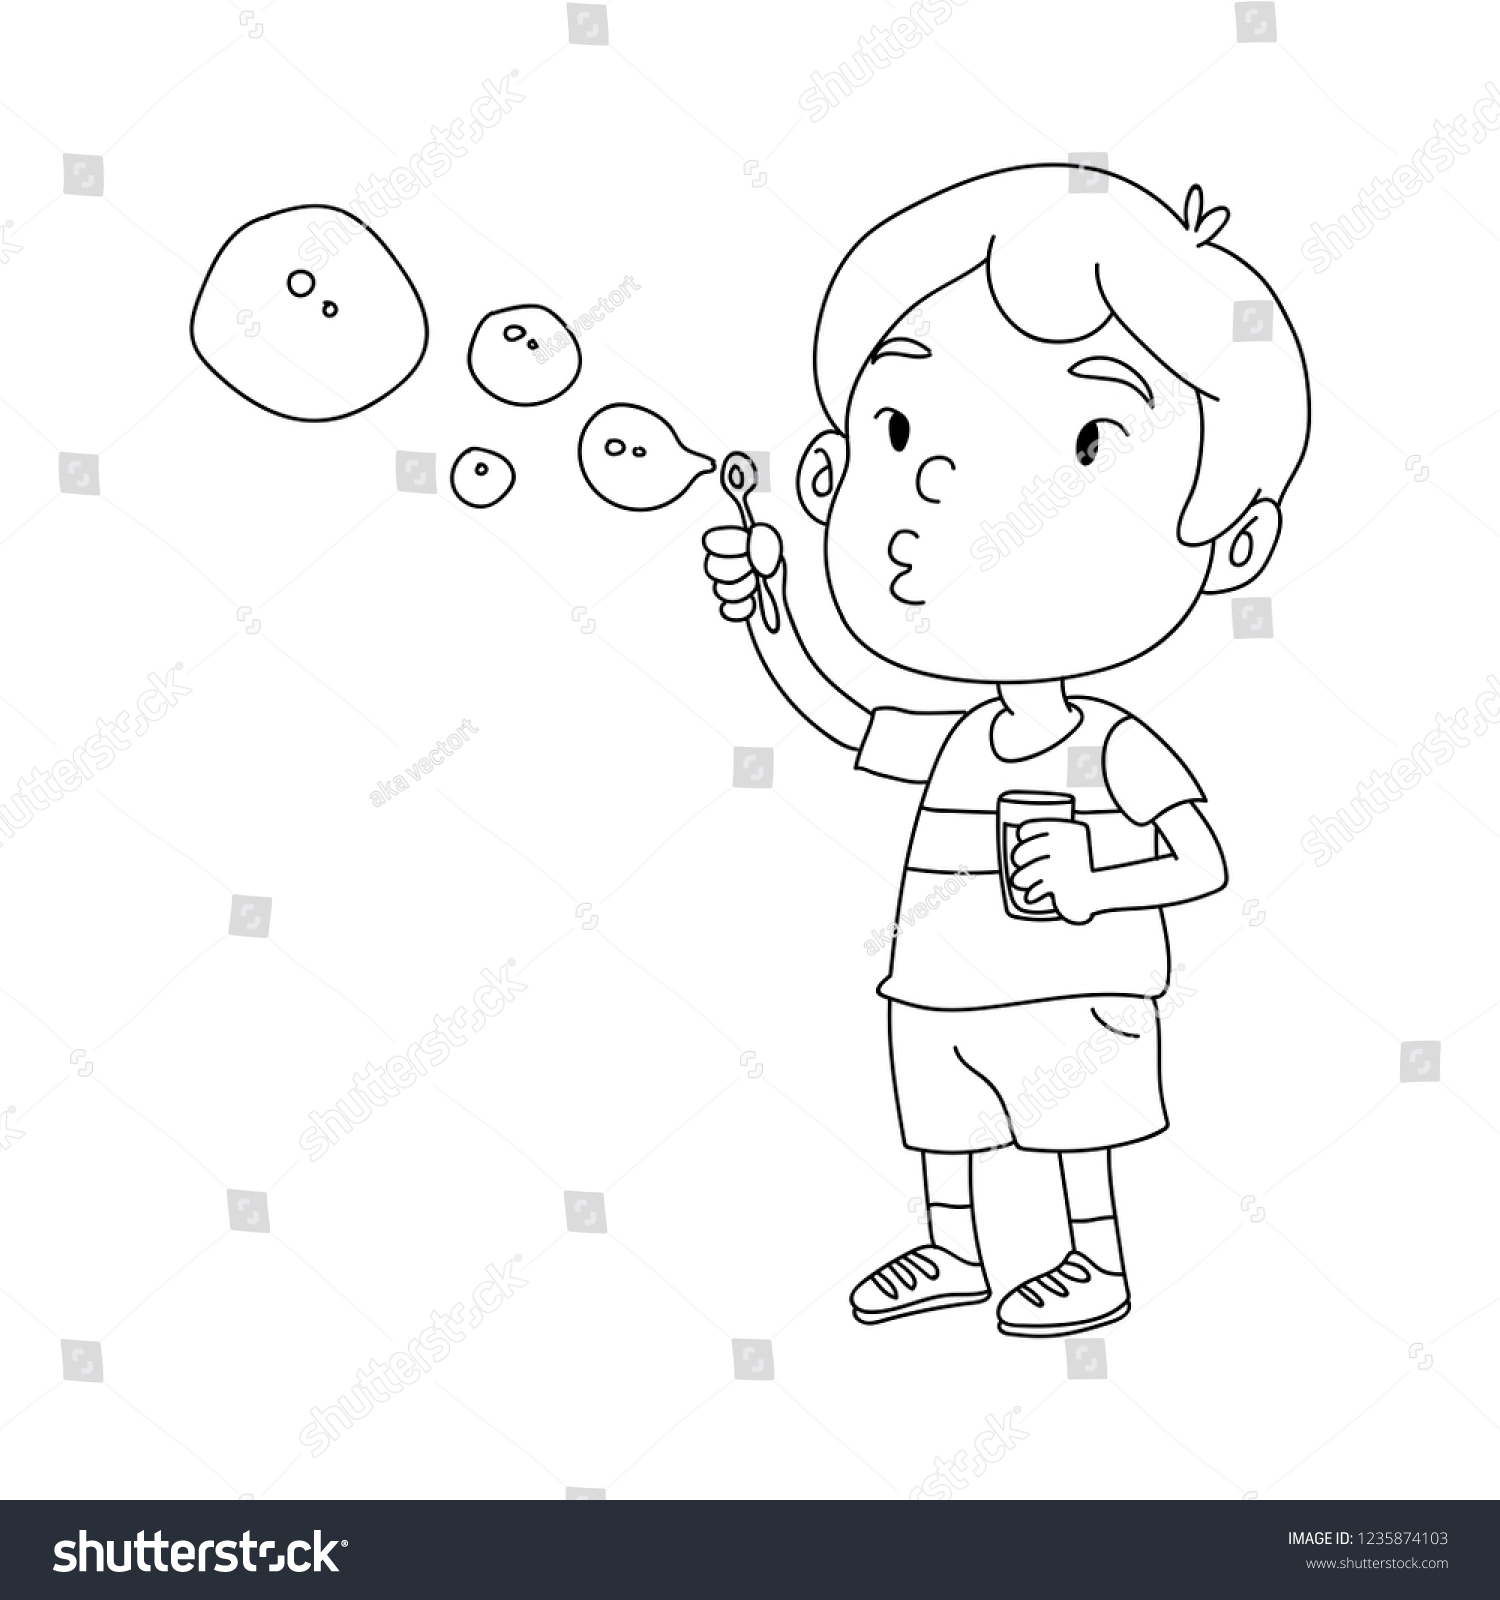 Kid Blowing Bubbles Outline Hand Drawn Stock Vector Royalty Free